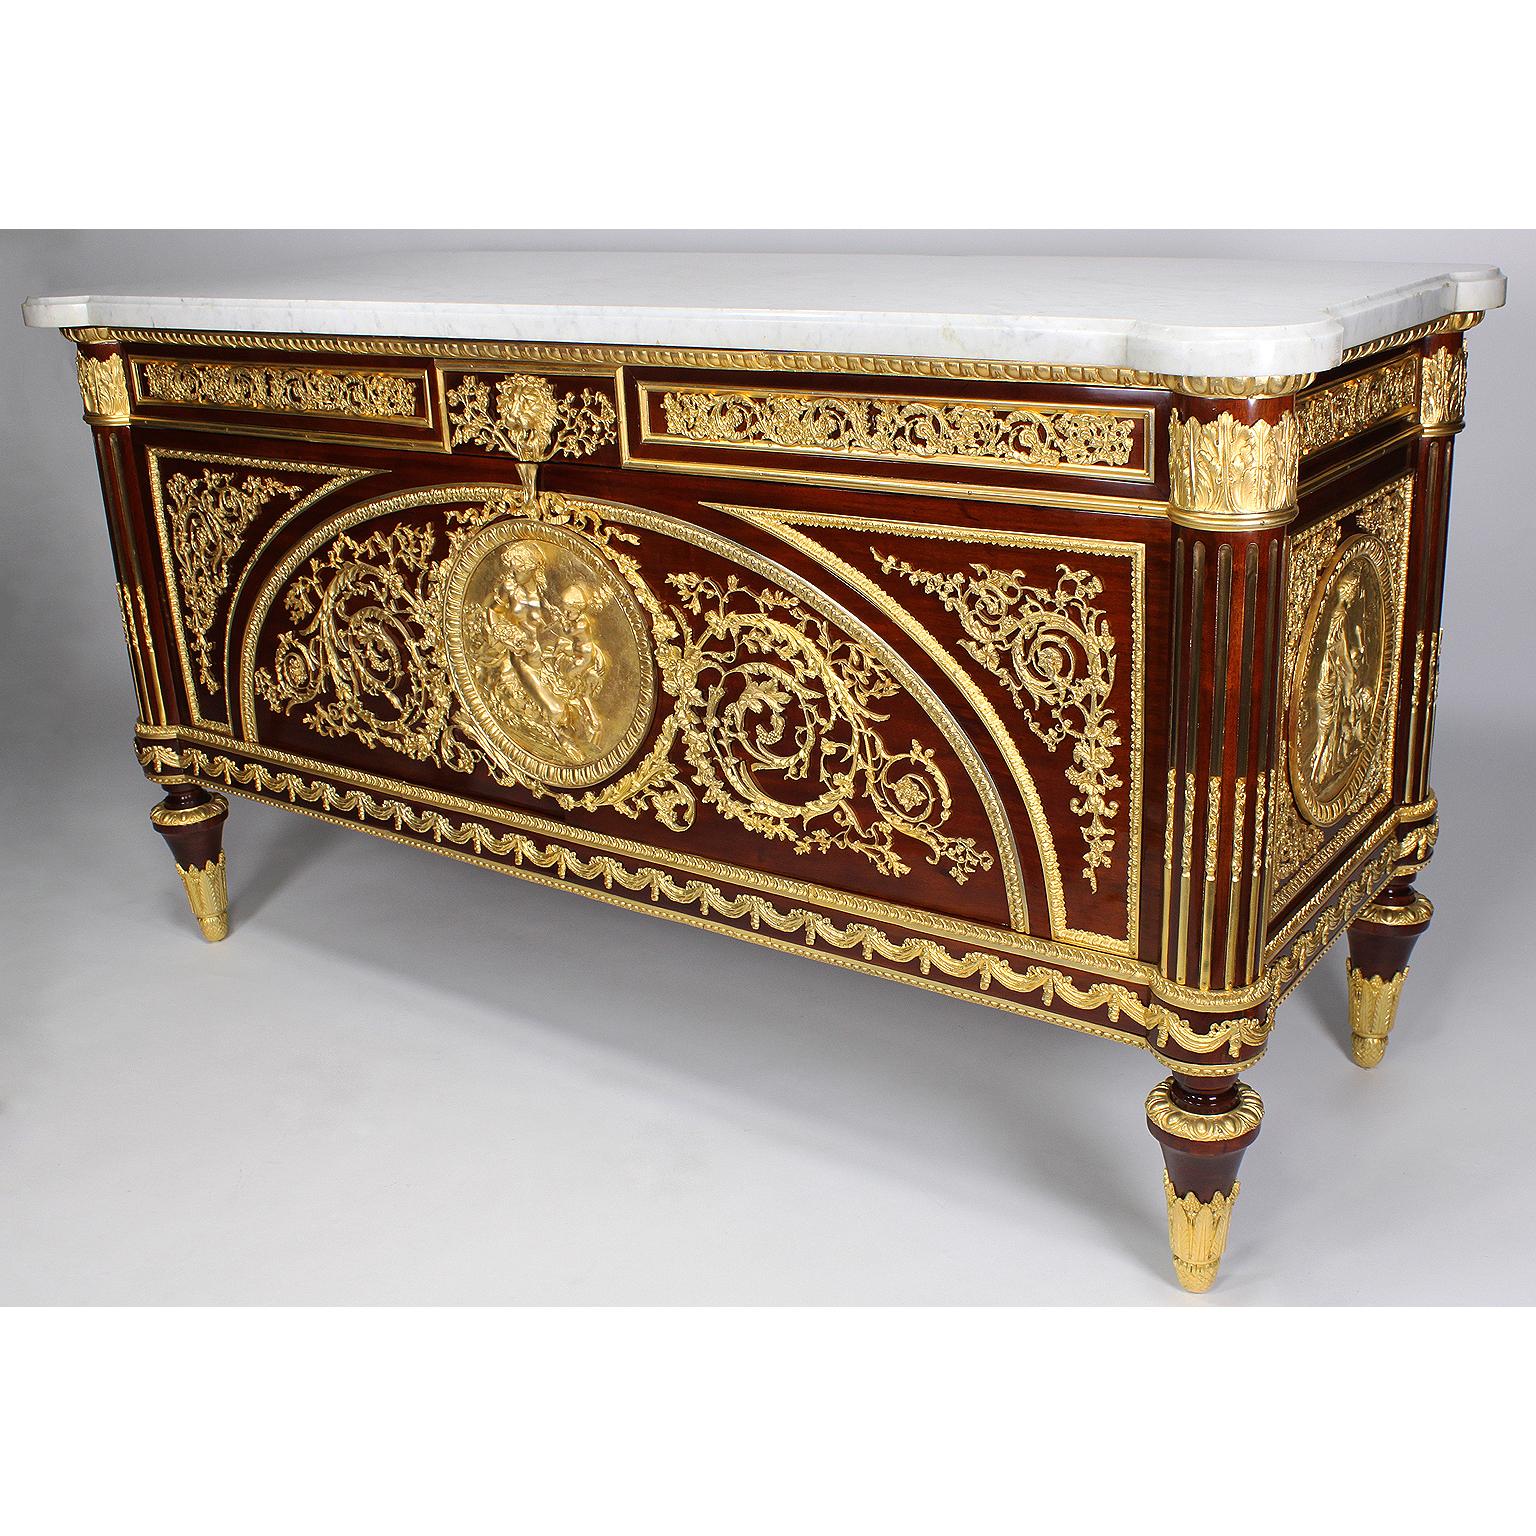 Impressive French Louis XVI Style Mahogany Gilt Bronze Mounted Server Commode In Good Condition For Sale In Los Angeles, CA